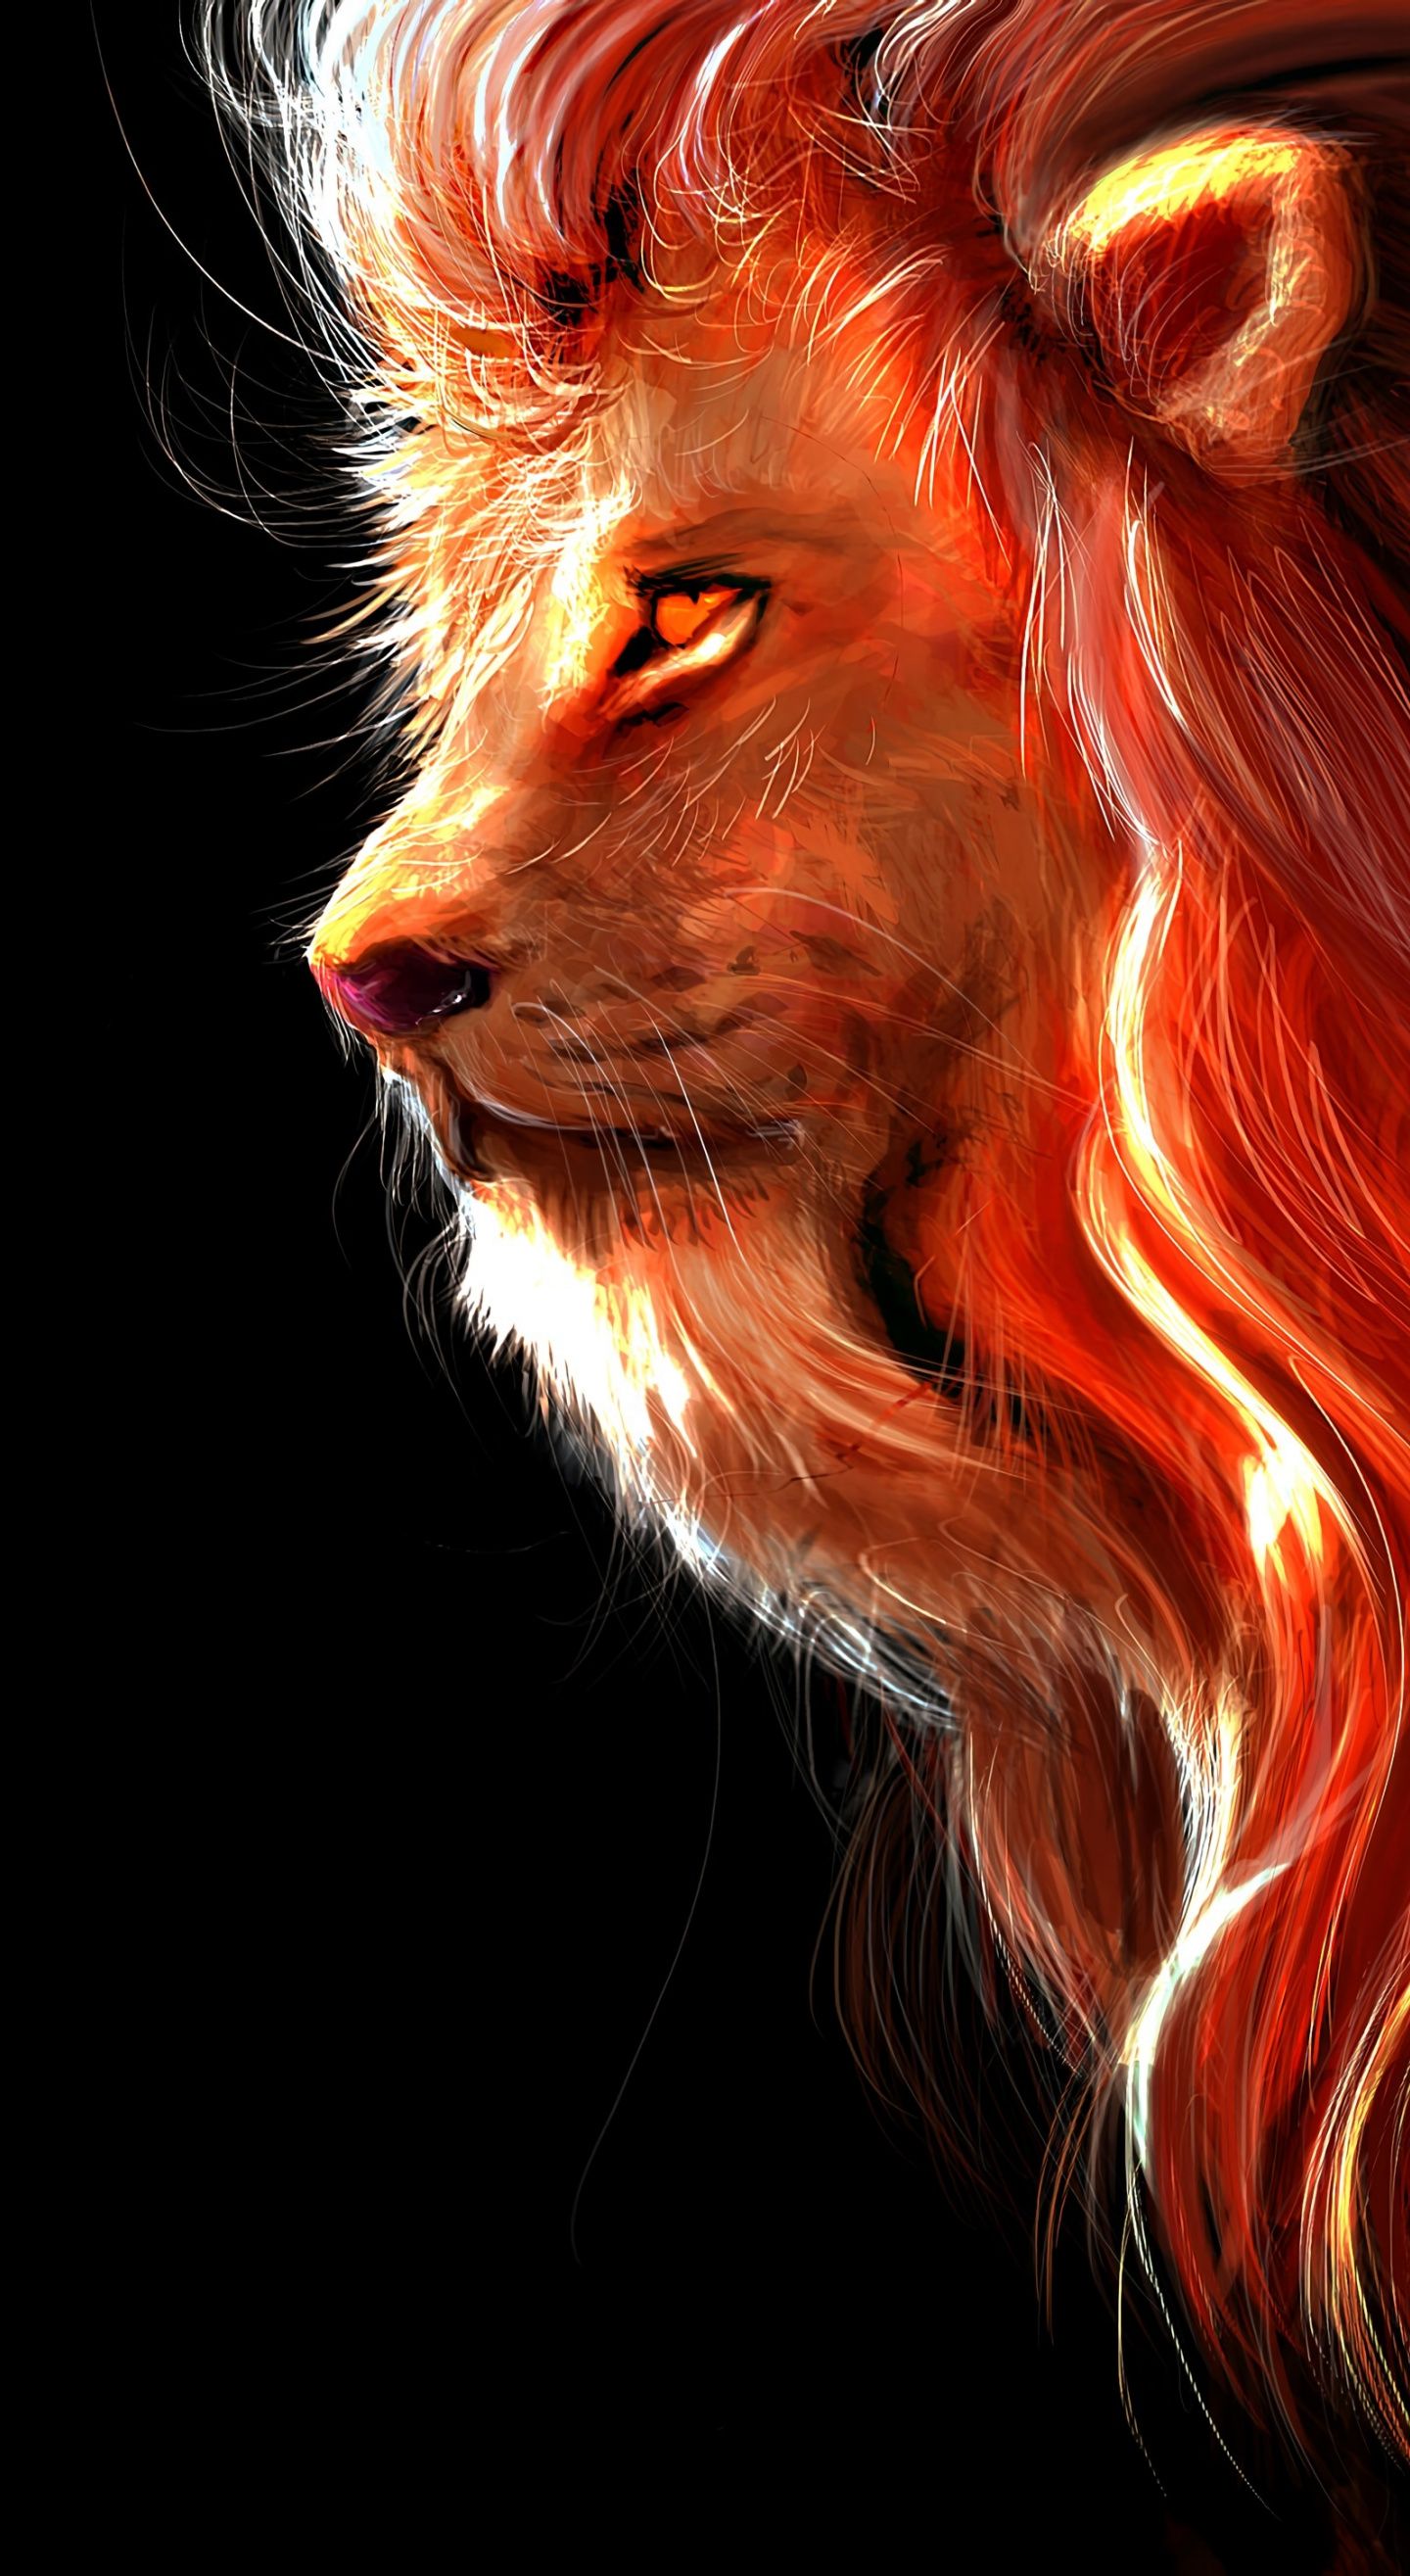 Lion Iphone Backgrounds - KoLPaPer - Awesome Free HD Wallpapers